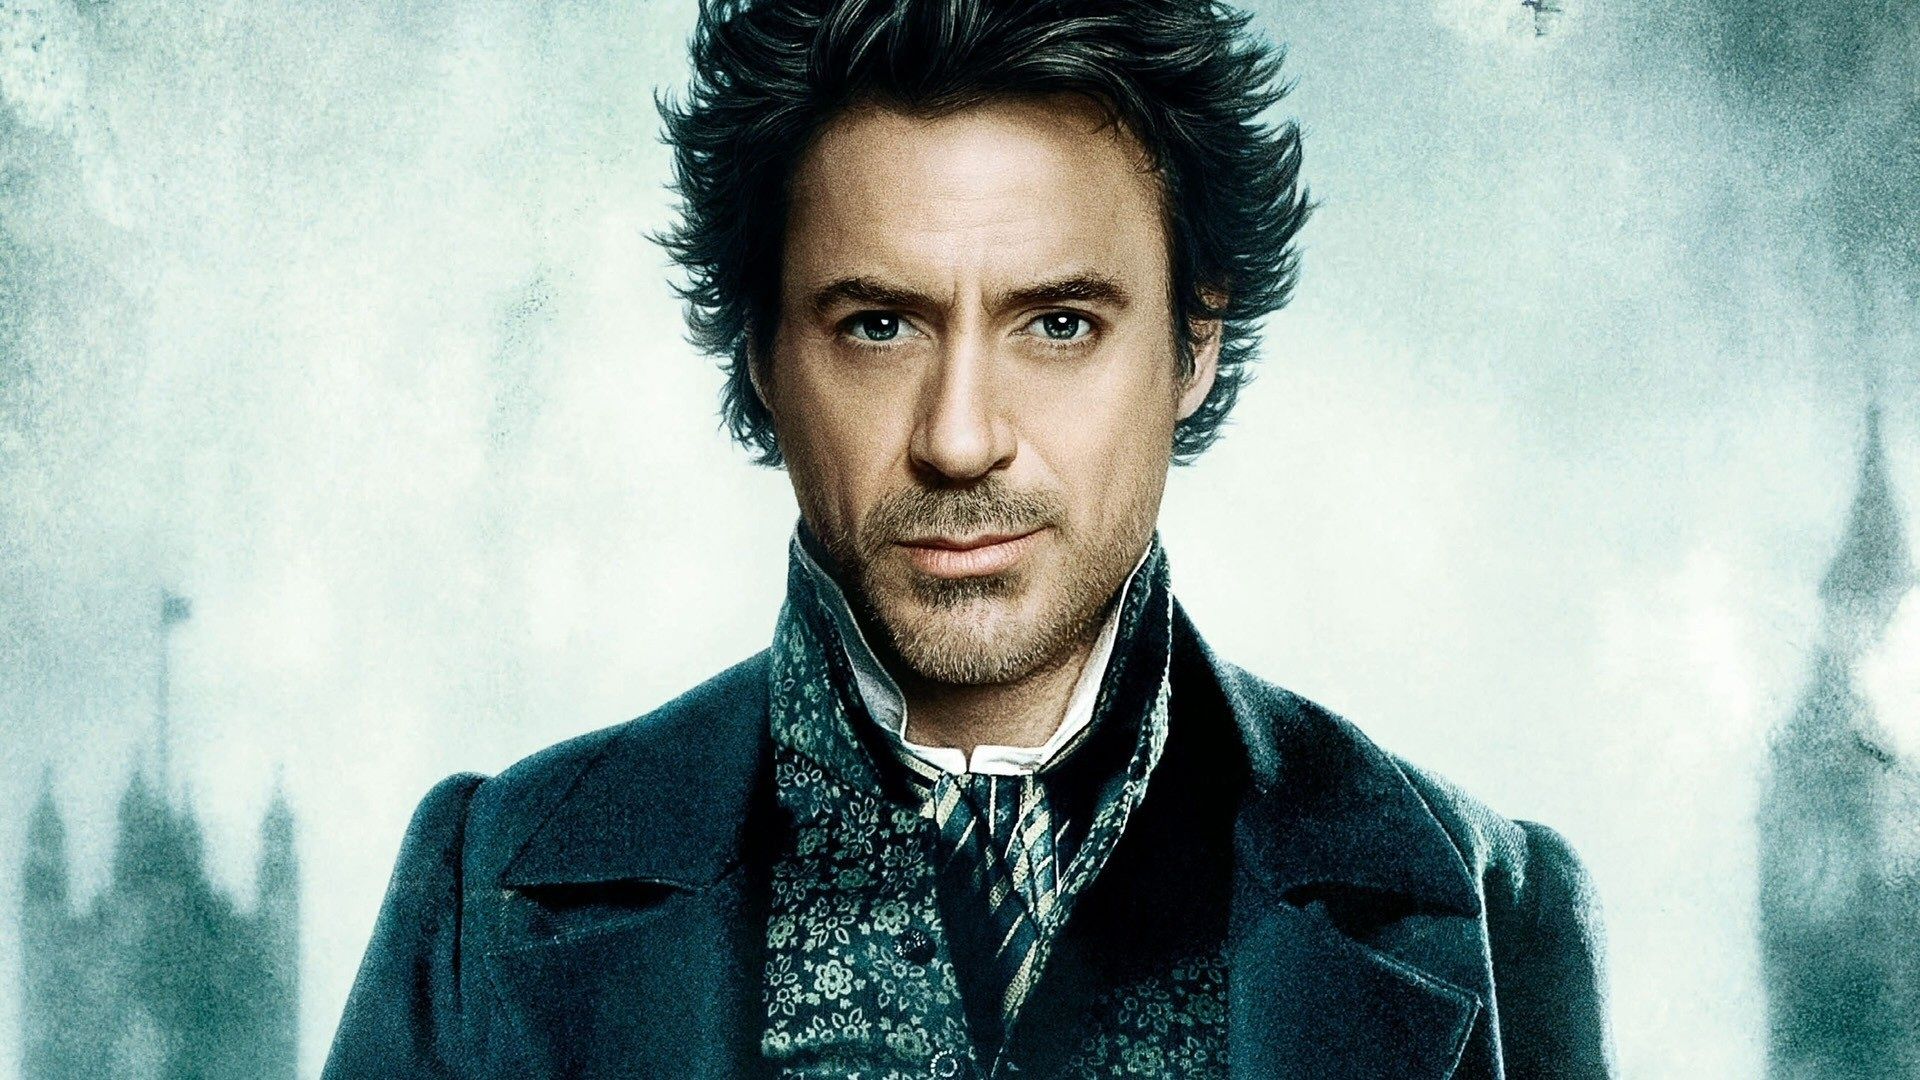 Robert Downey Jr. in Action HD Wallpapers Free Download | NEW HD ...